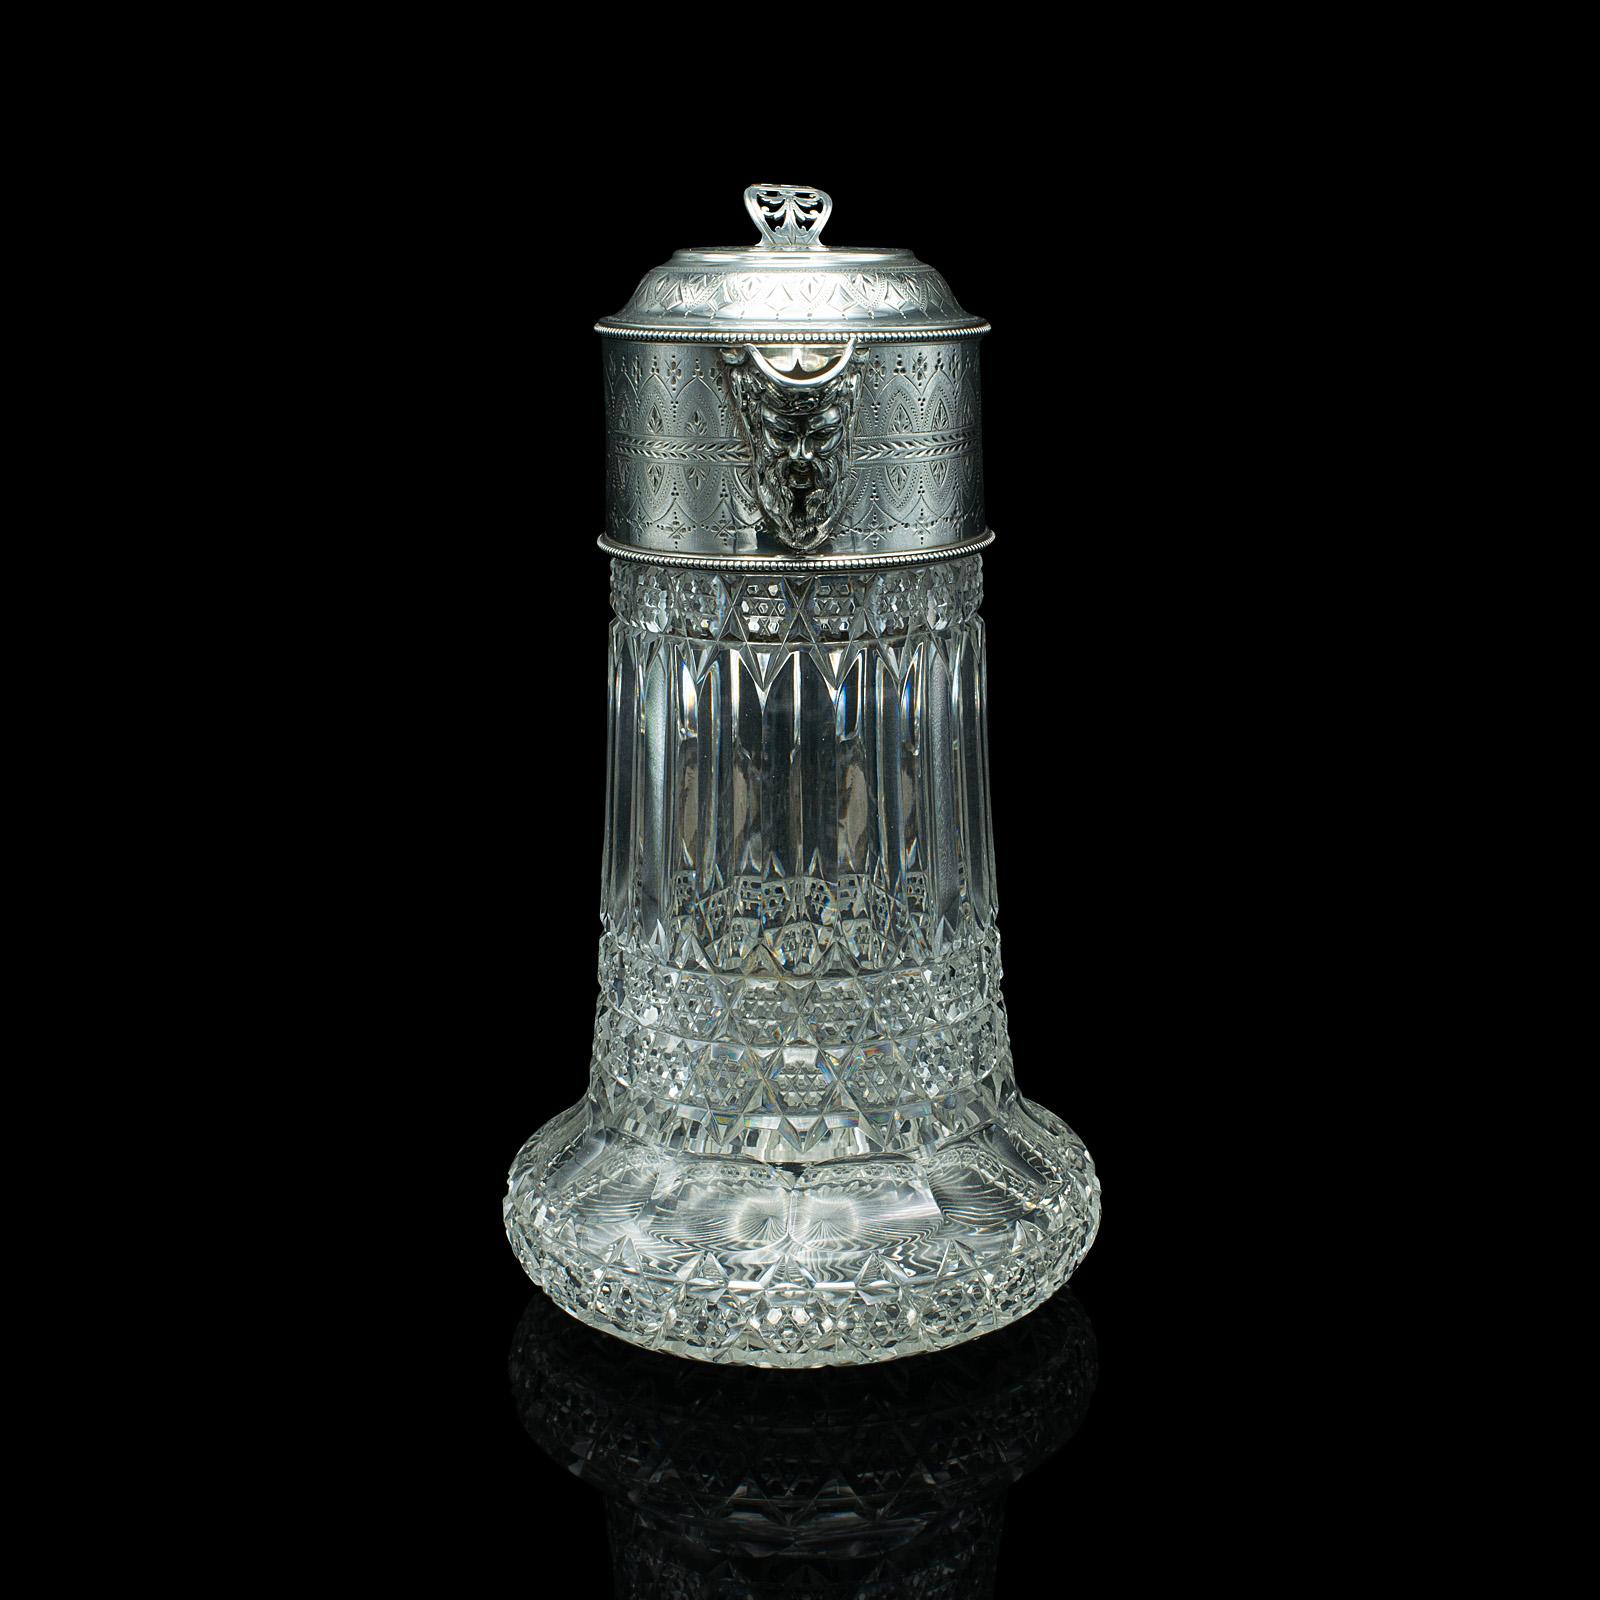 20th Century Antique Claret Jug, English, Cut Glass, Silver Plate, Decanter, Victorian, 1900 For Sale